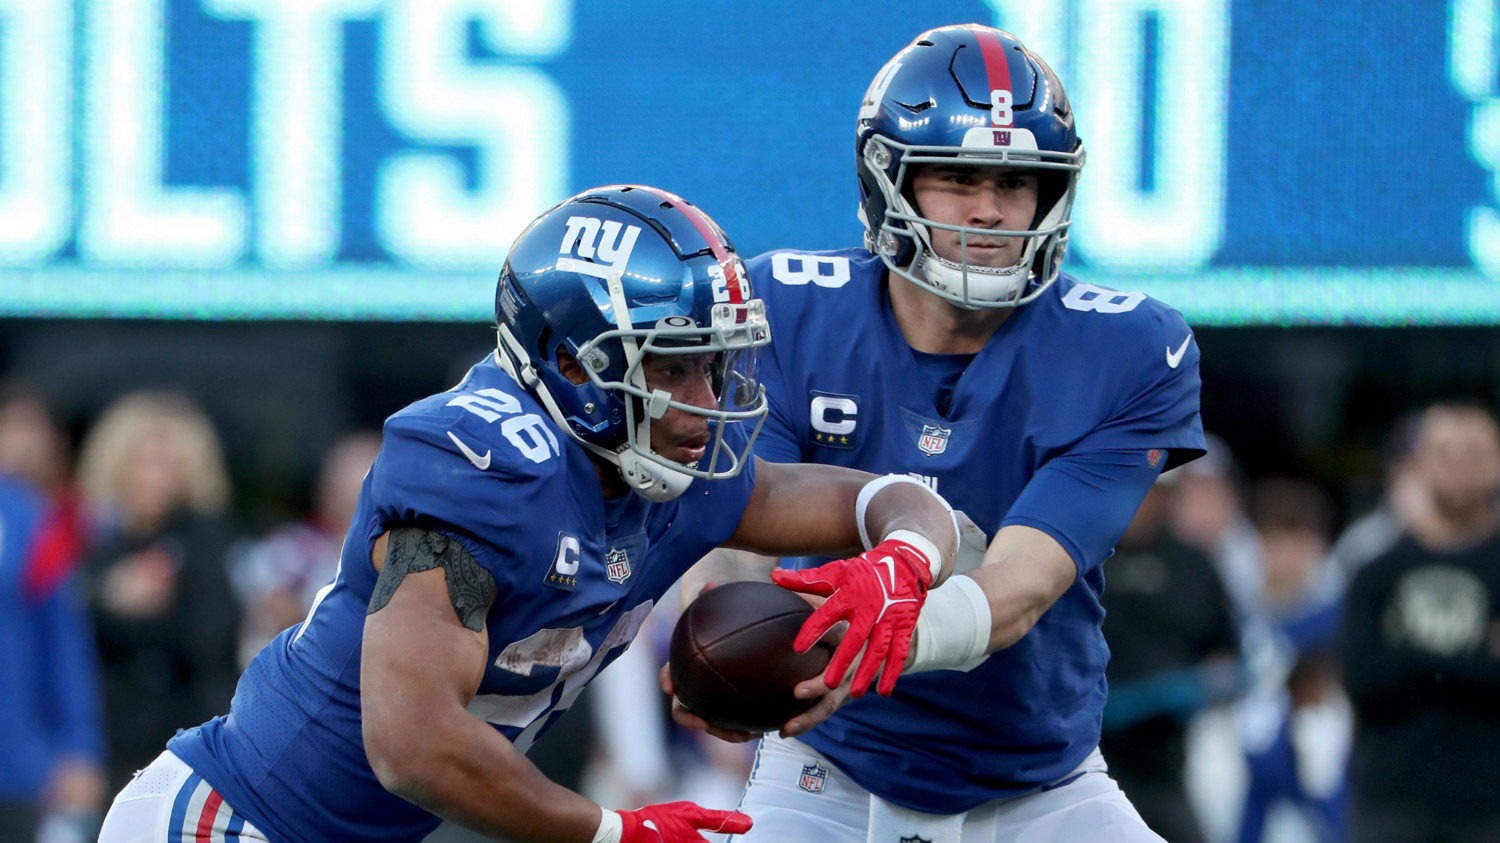 Giants vs. Eagles Odds, Props & Parlays: NFL Divisional Round